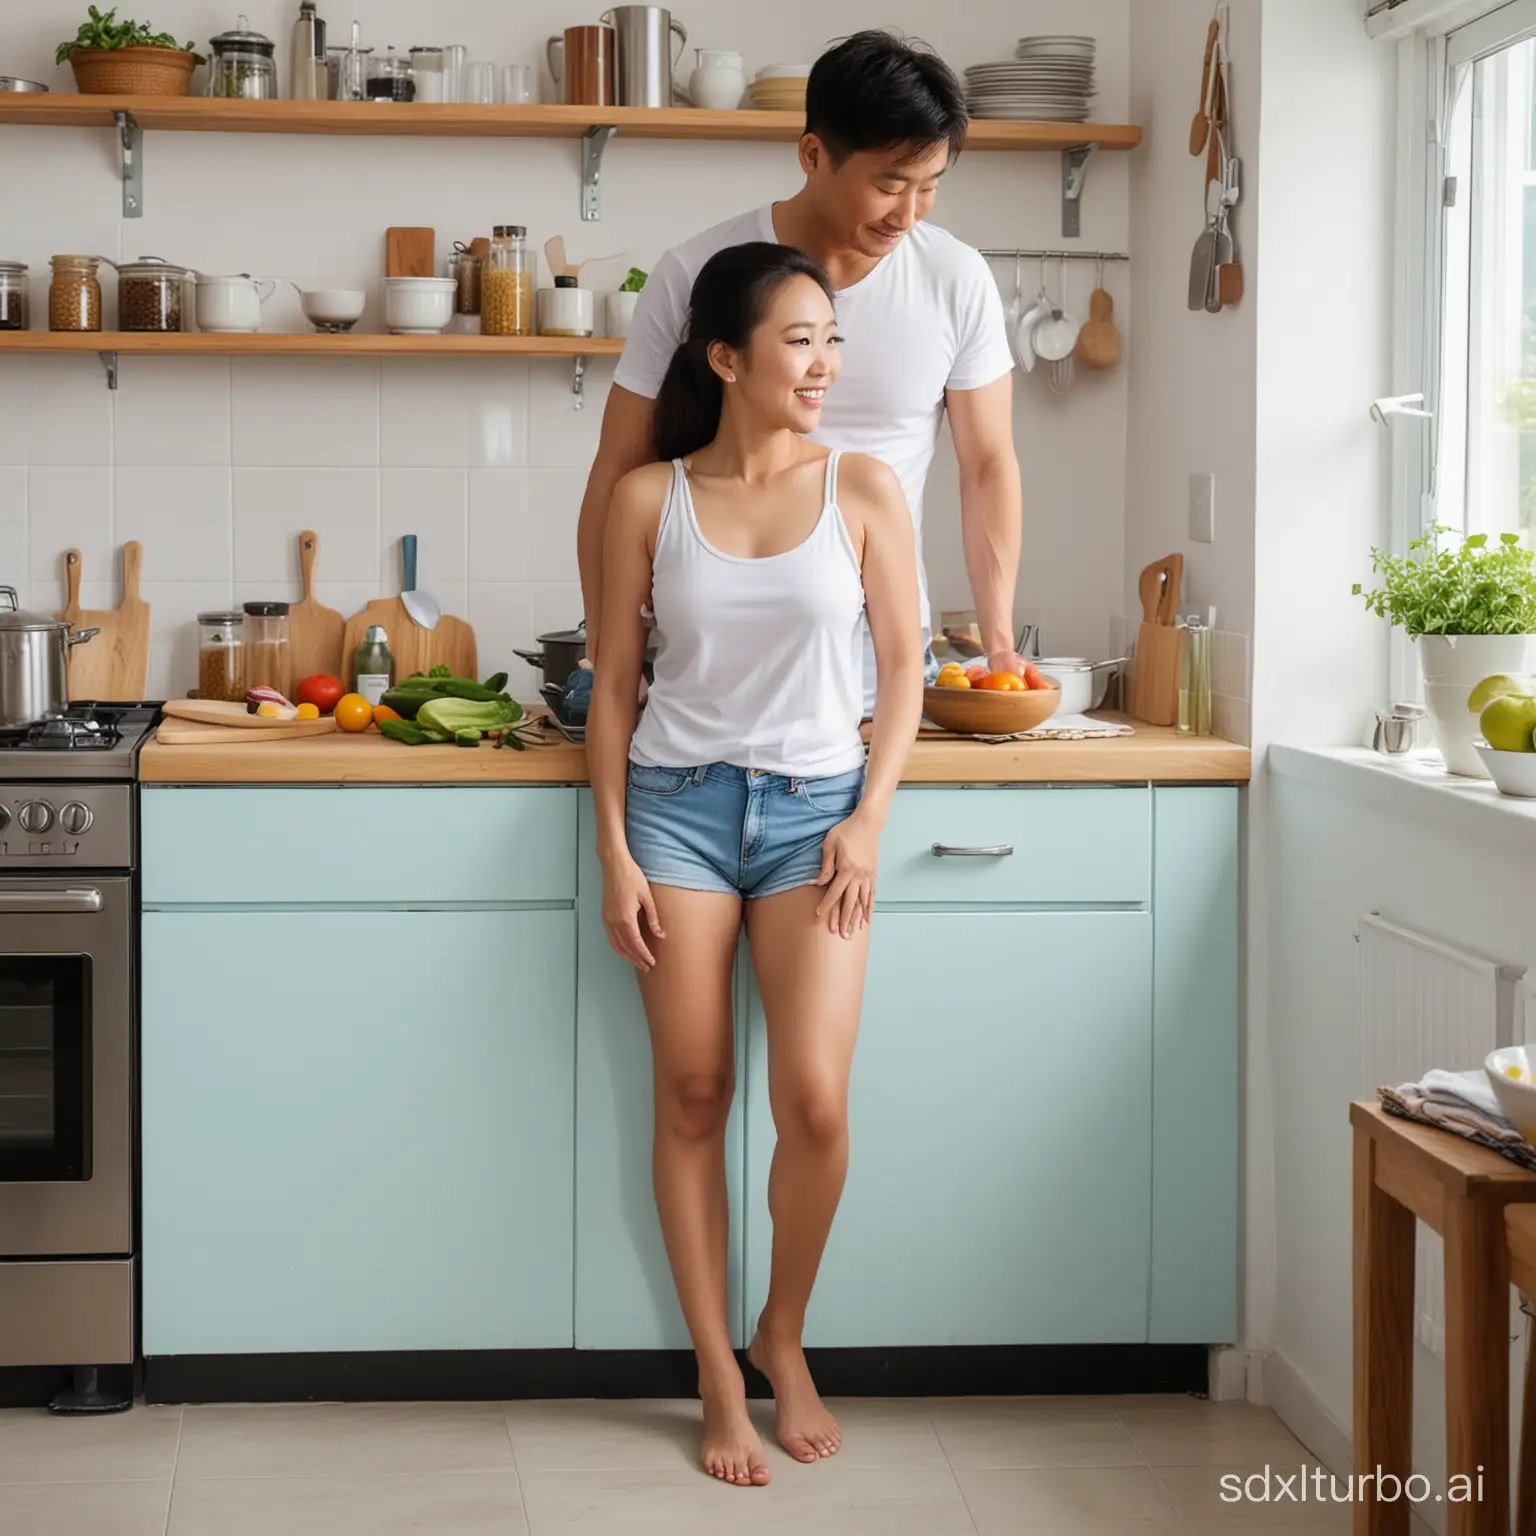 Chinese-Couple-Cooking-Together-in-Kitchen